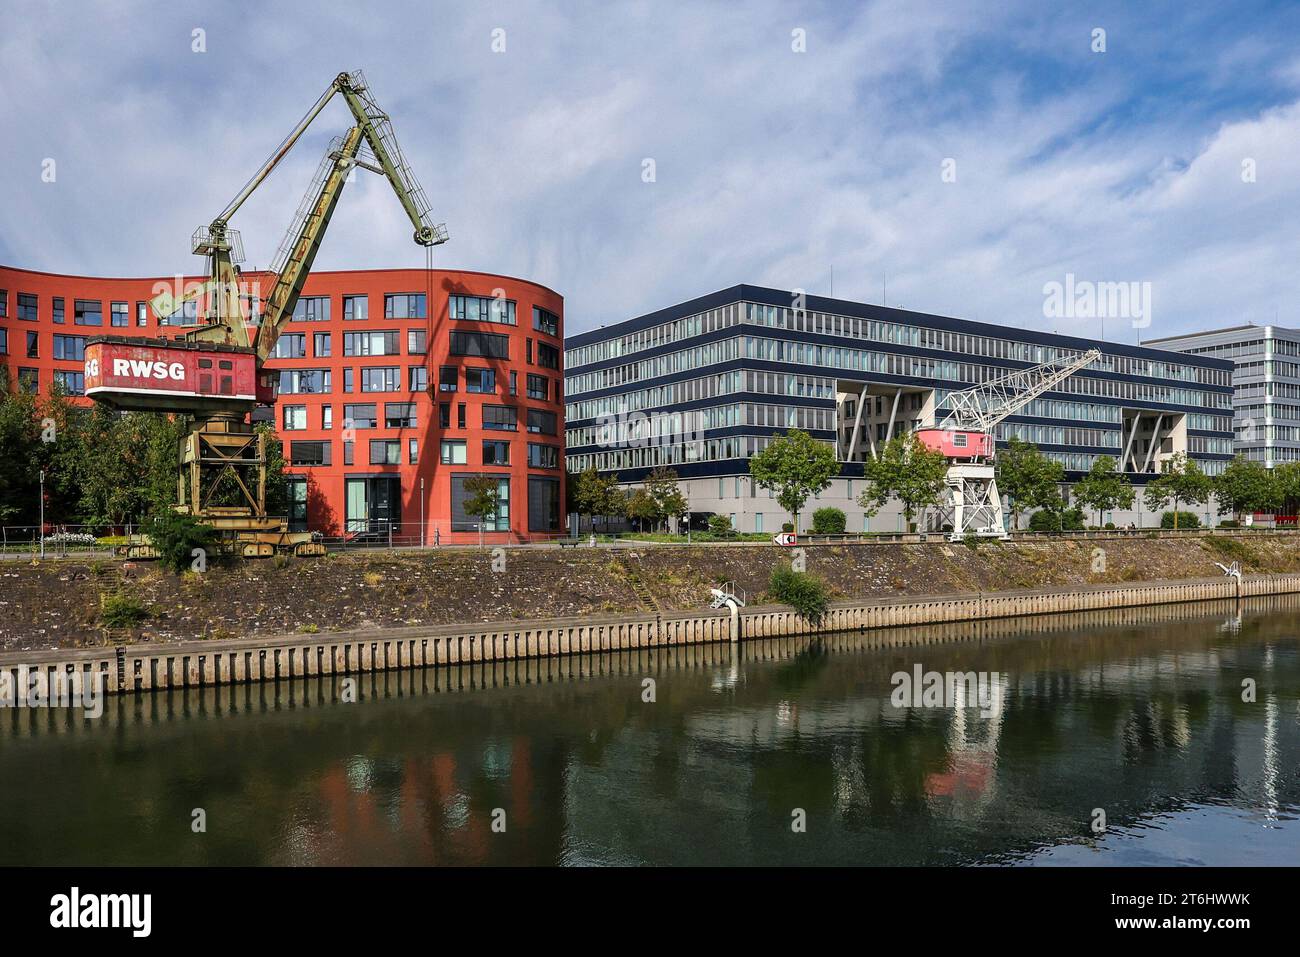 Duisburg, Ruhr area, North Rhine-Westphalia, Germany - Duisburg inner harbor with the wave-shaped building of the North Rhine-Westphalia state archive and old harbor cranes. On the right modern office buildings. Stock Photo